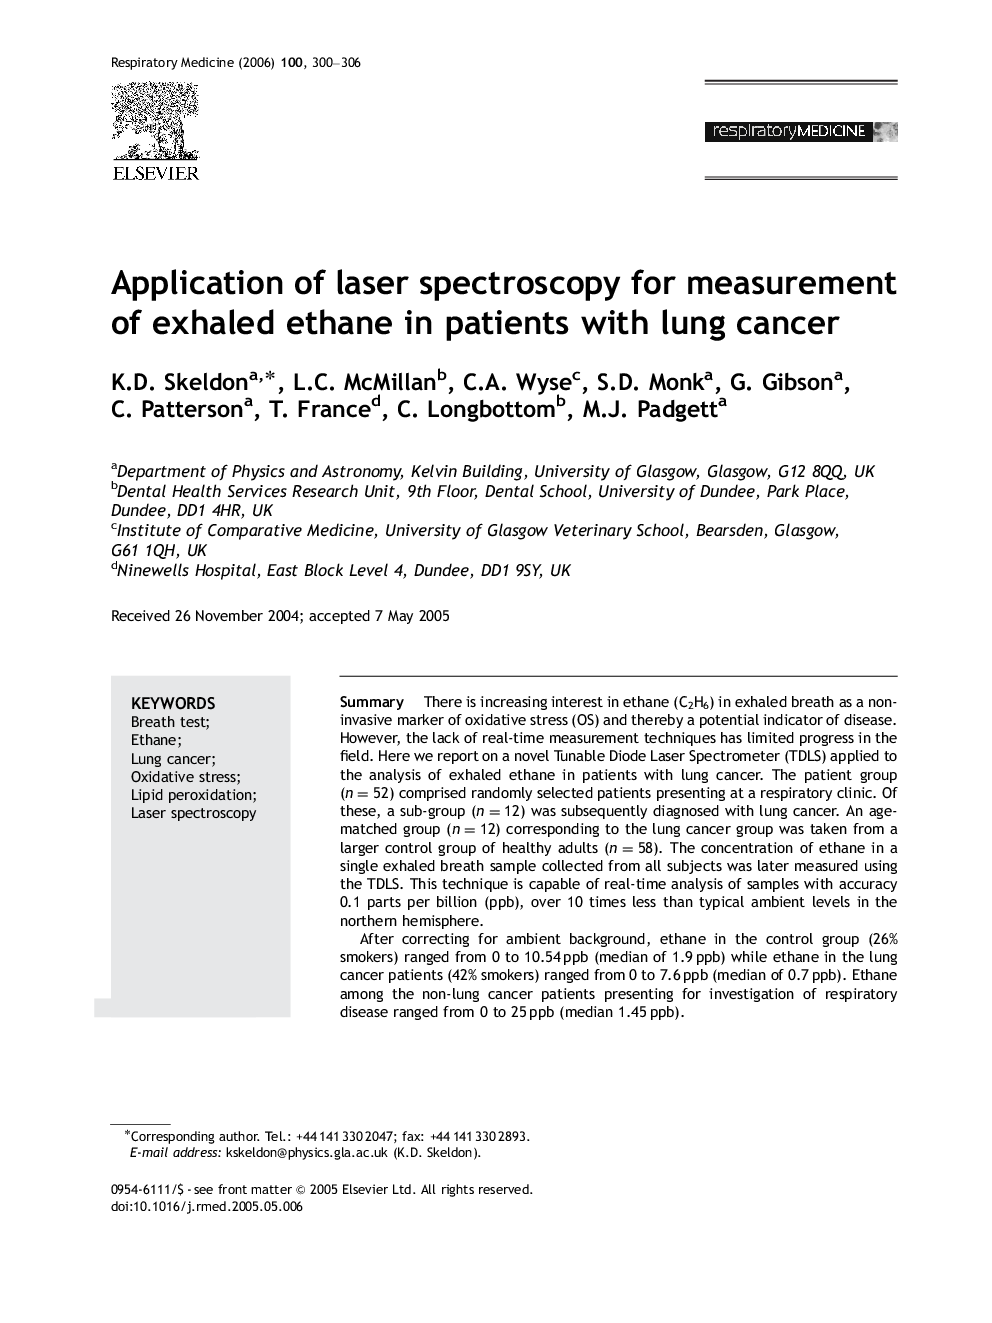 Application of laser spectroscopy for measurement of exhaled ethane in patients with lung cancer